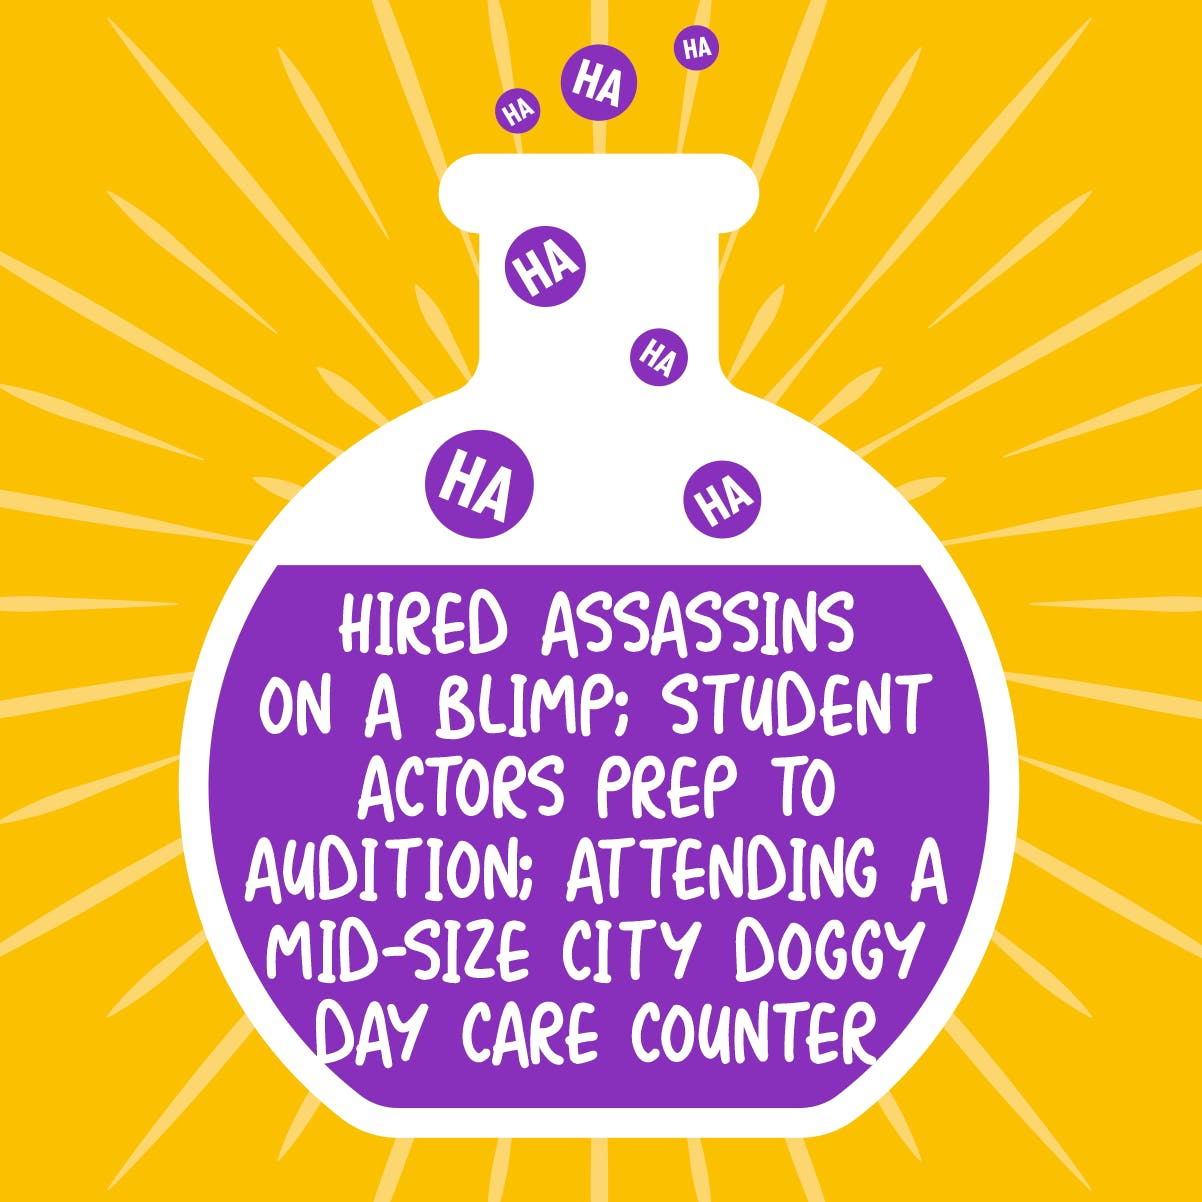 Hired Assassins on a Blimp; Student Actors Prep to Audition; Attending a Mid-size City Doggy Day Care Counter